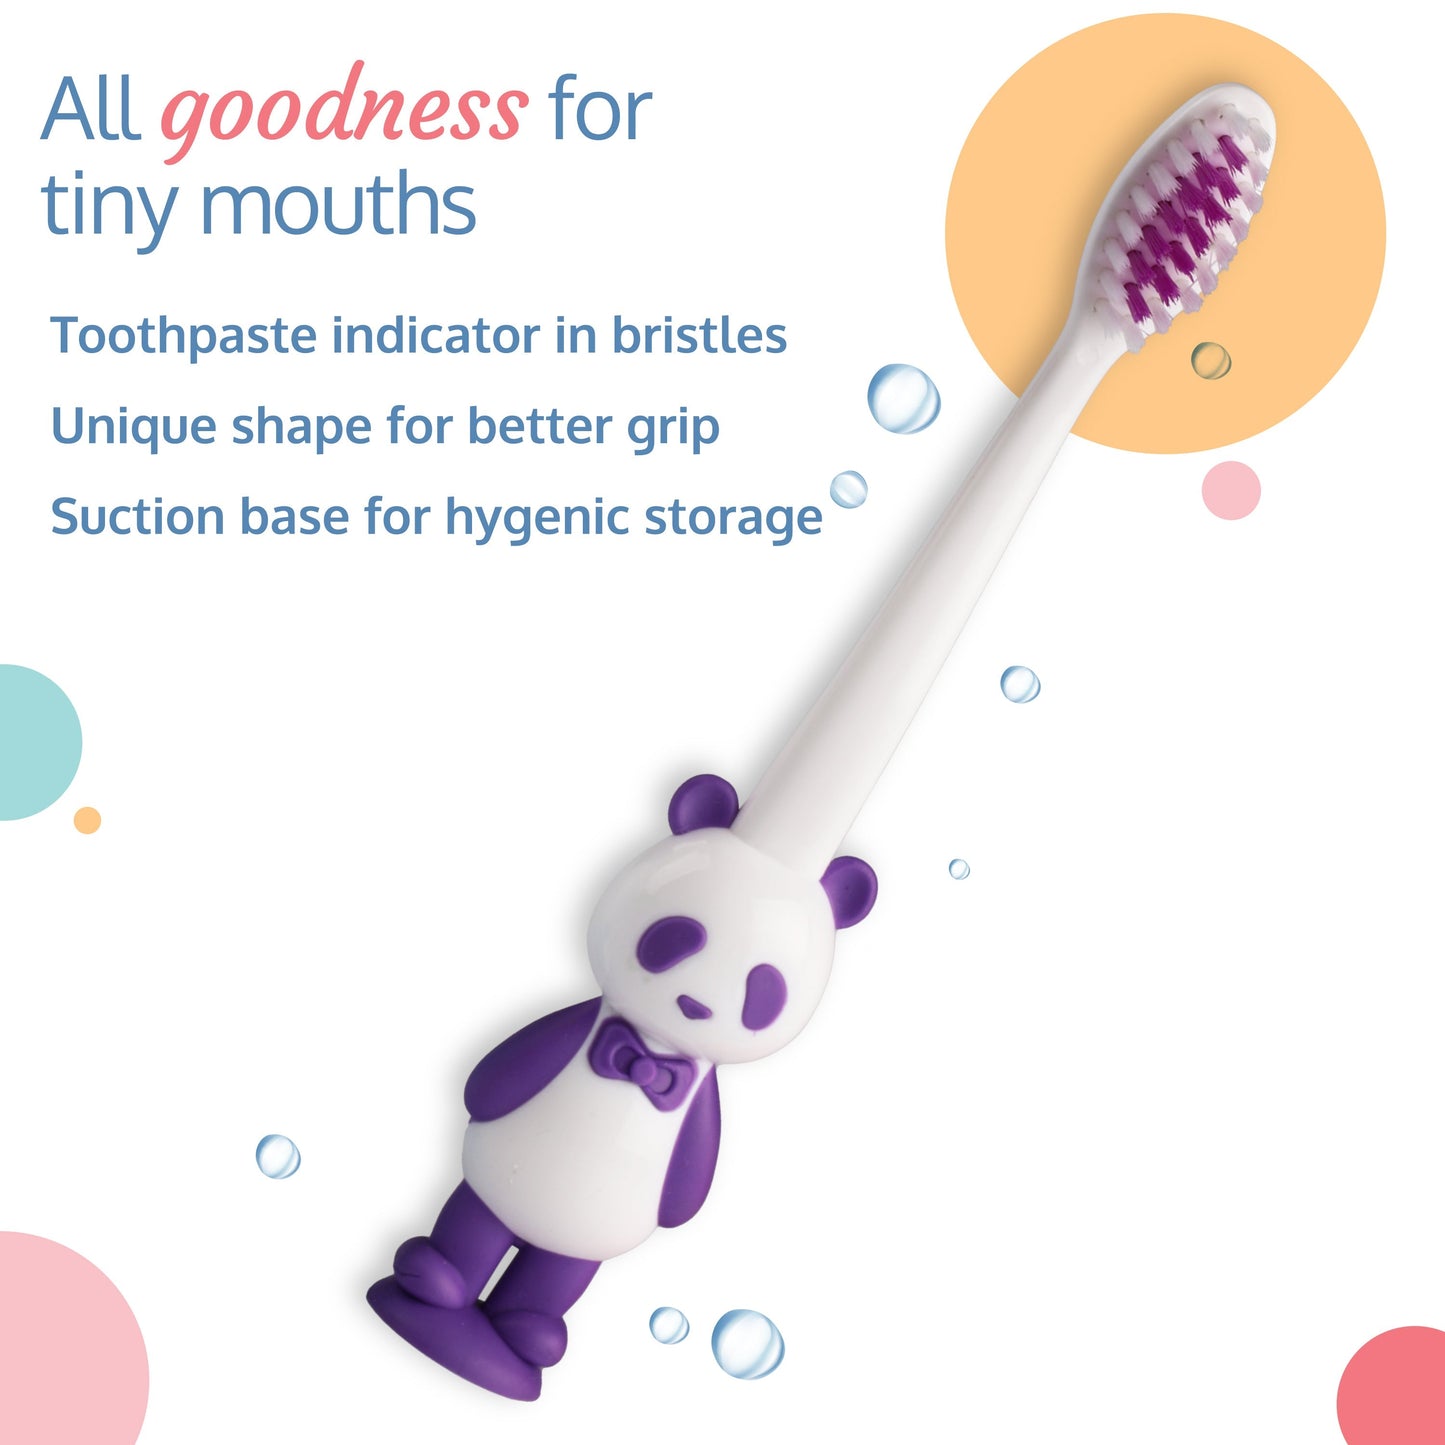 Panda Toothbrush with 12000 Nano Floss Bristles, Multicolor (Assorted - Colors may vary)